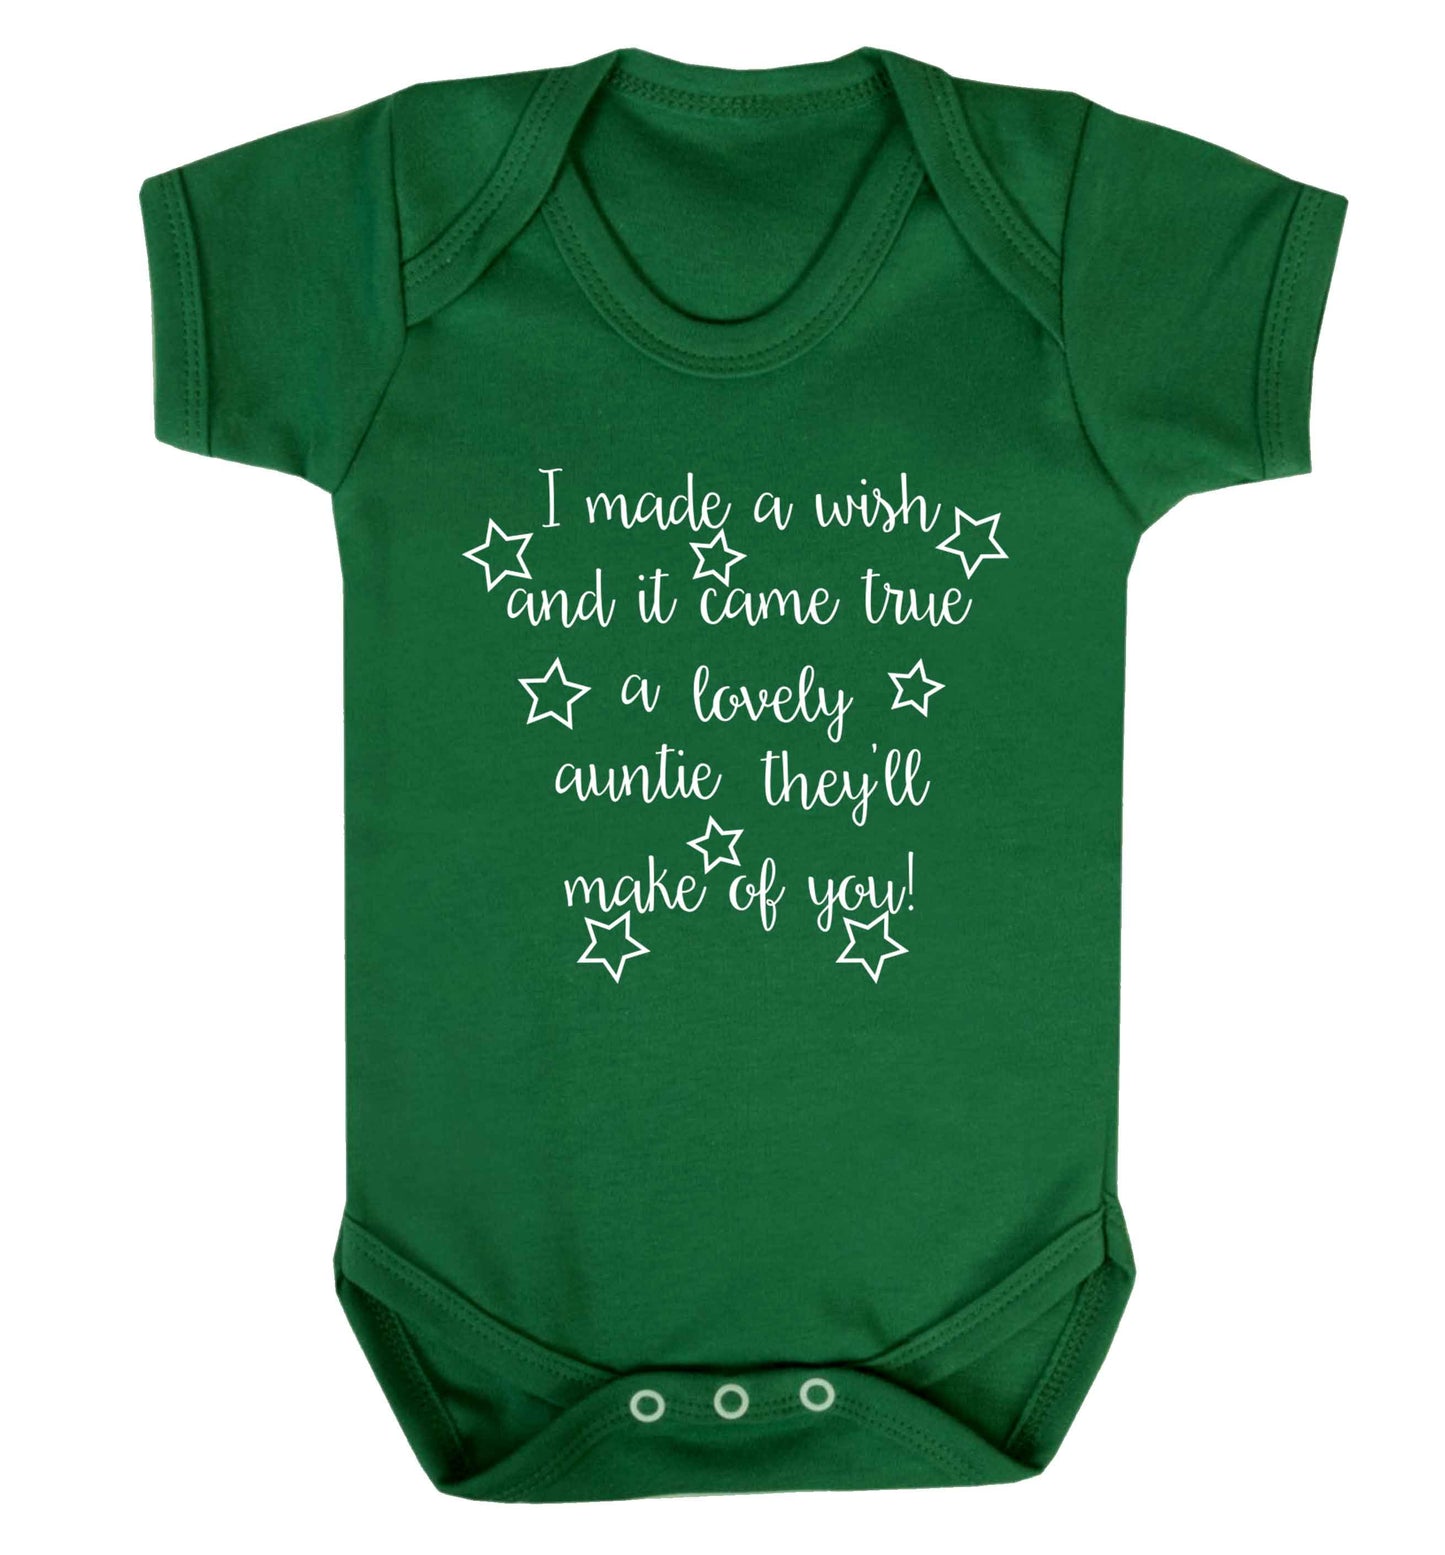 I made a wish and it came true a lovely auntie they'll make of you! Baby Vest green 18-24 months